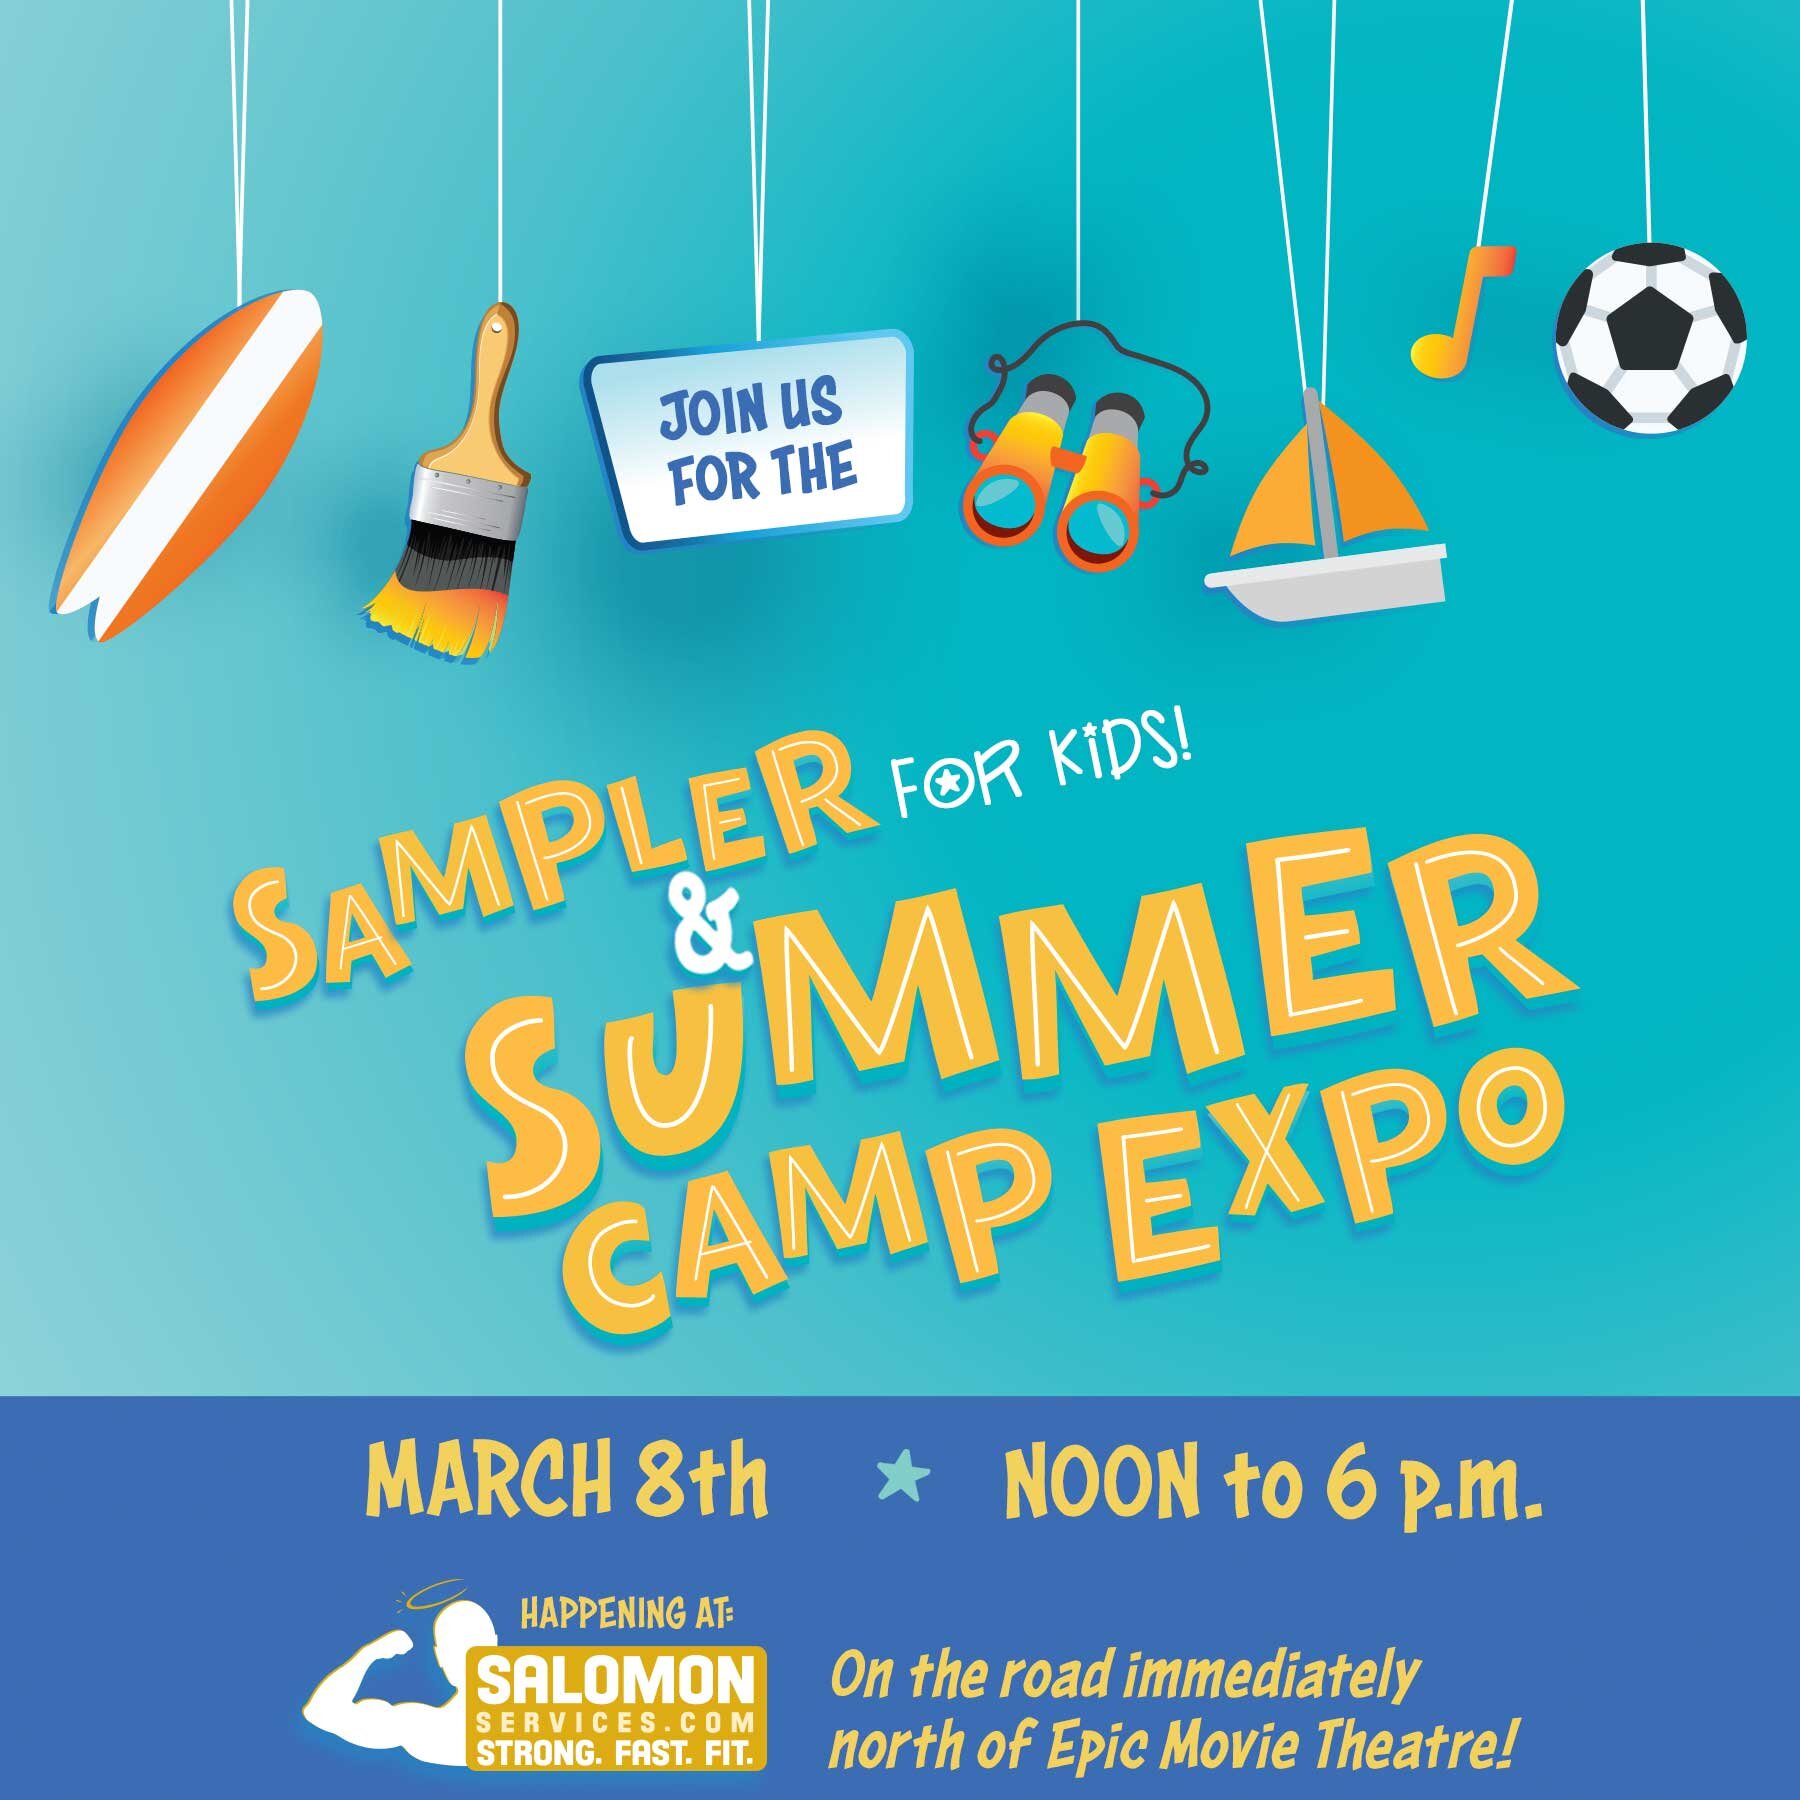 Sampler for Kids and Summer Camp Expo